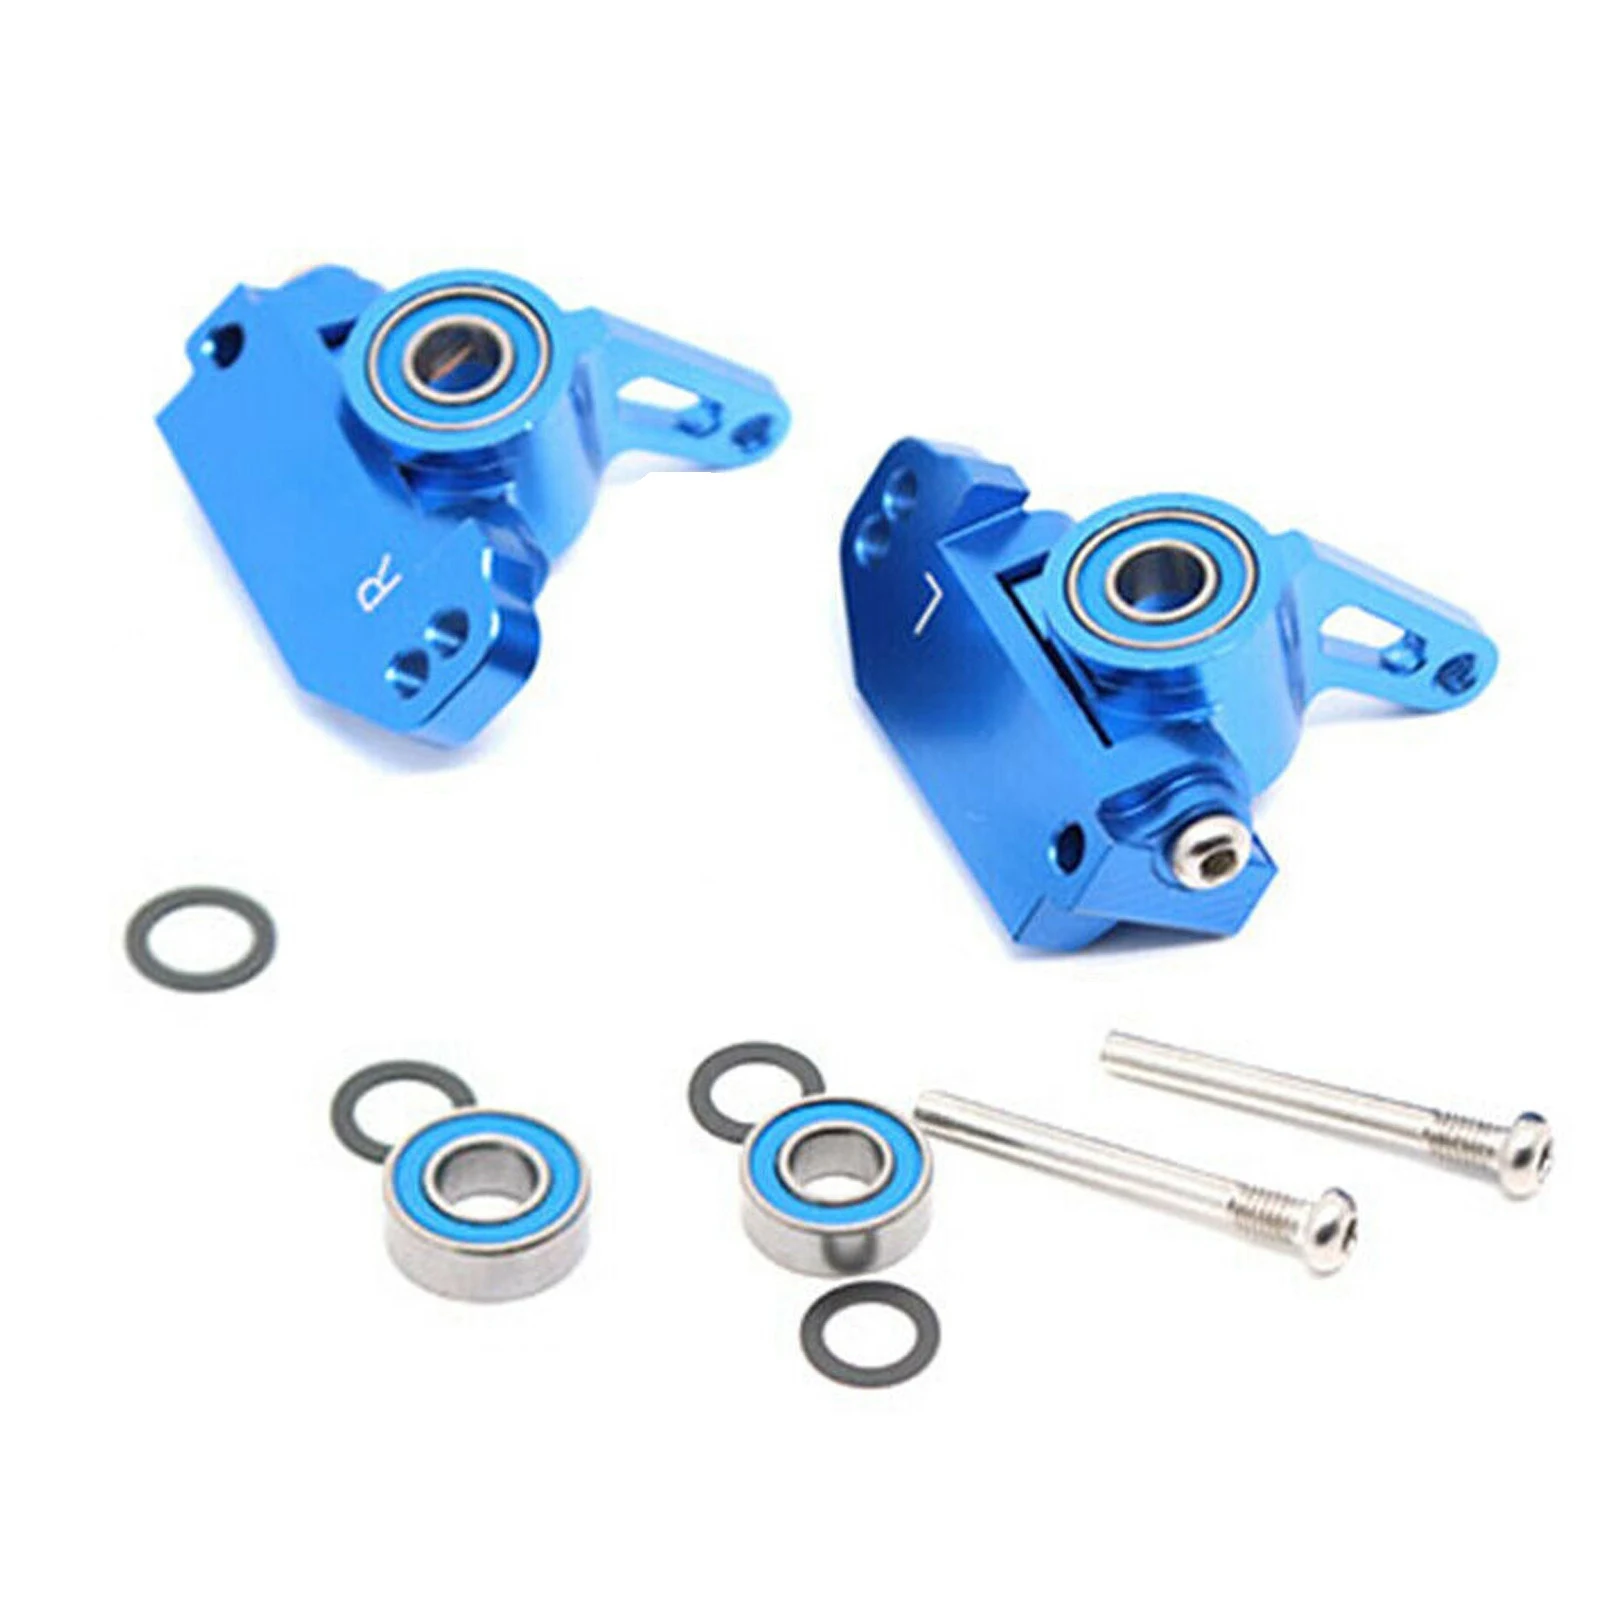 Aluminum Alloy Front Steering Cup Mount Set for Traxxas Slash 2WD RC Car Truck 